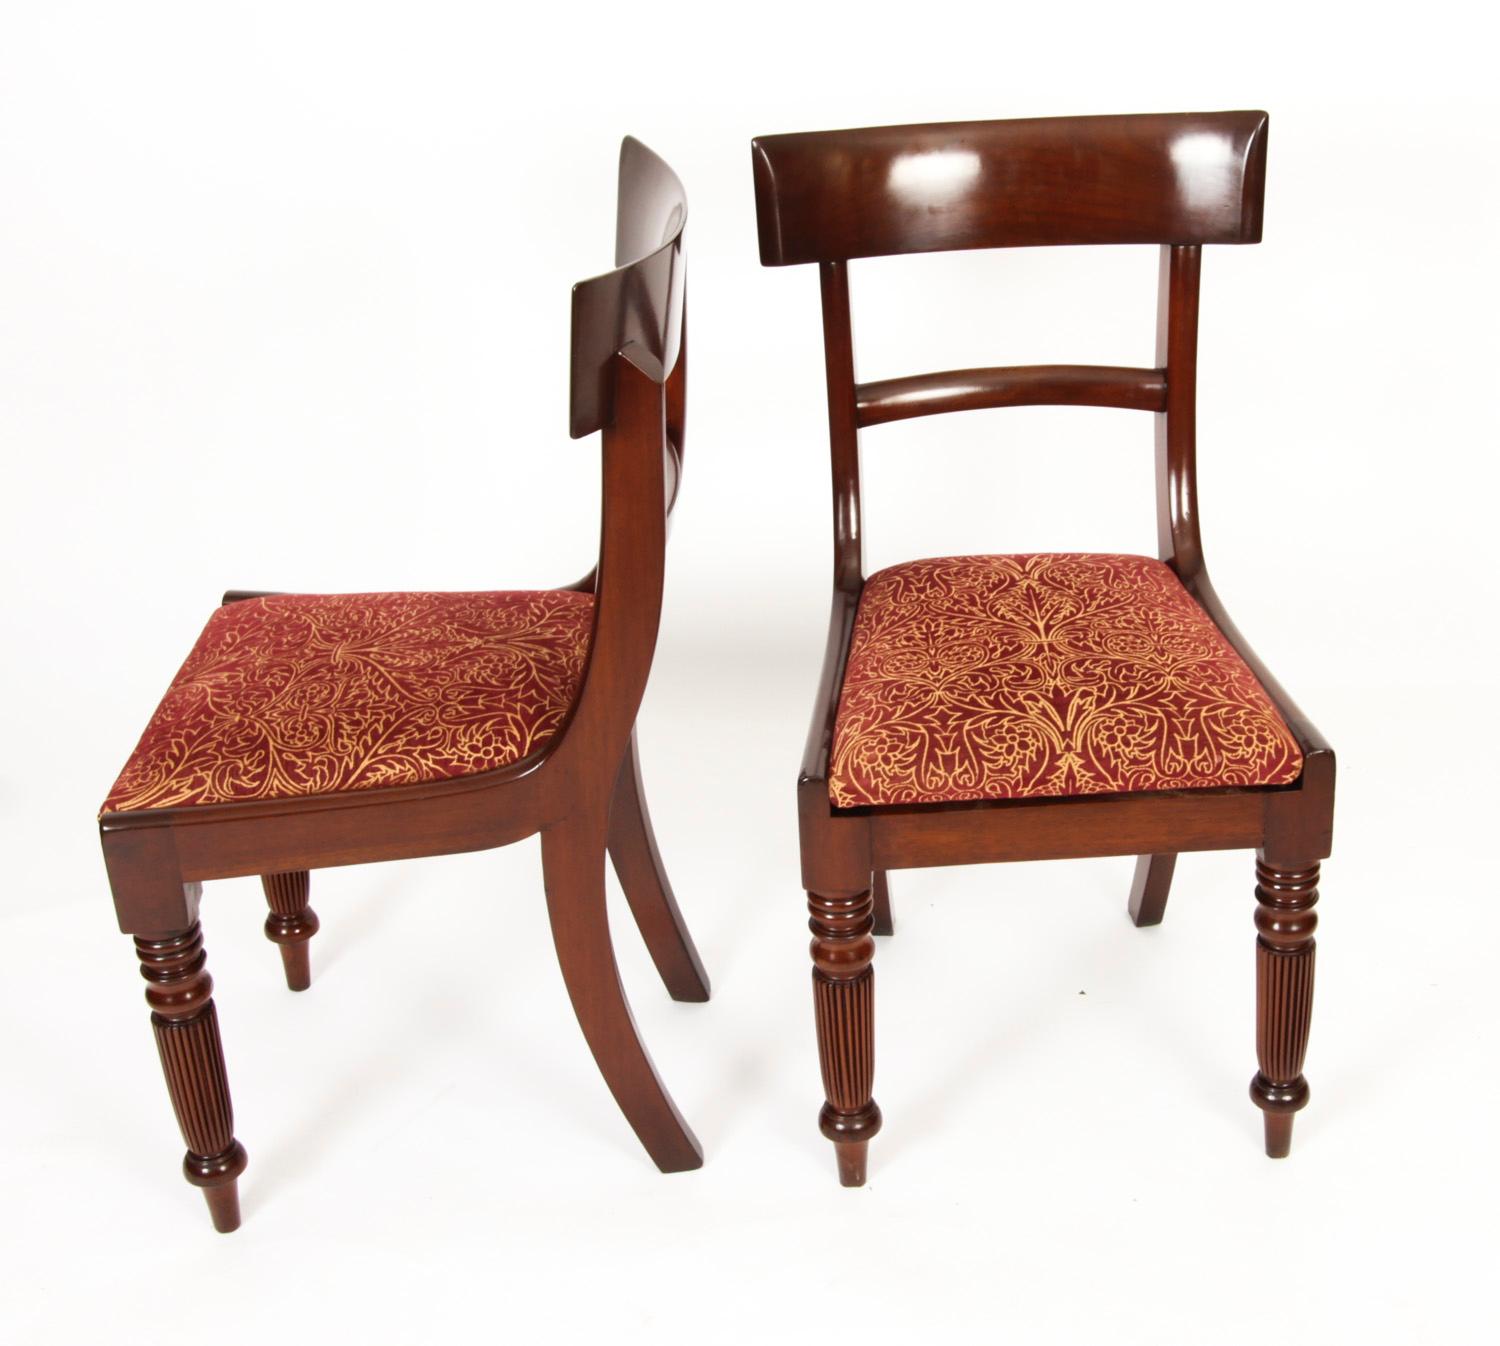 This is a fantastic antique English made set of ten William IV mahogany barback dining chairs, circa 1830 in date.
 
The botanical name for the mahogany these chairs are made of is Swietenia Macrophylla and this type of mahogany is not subject to